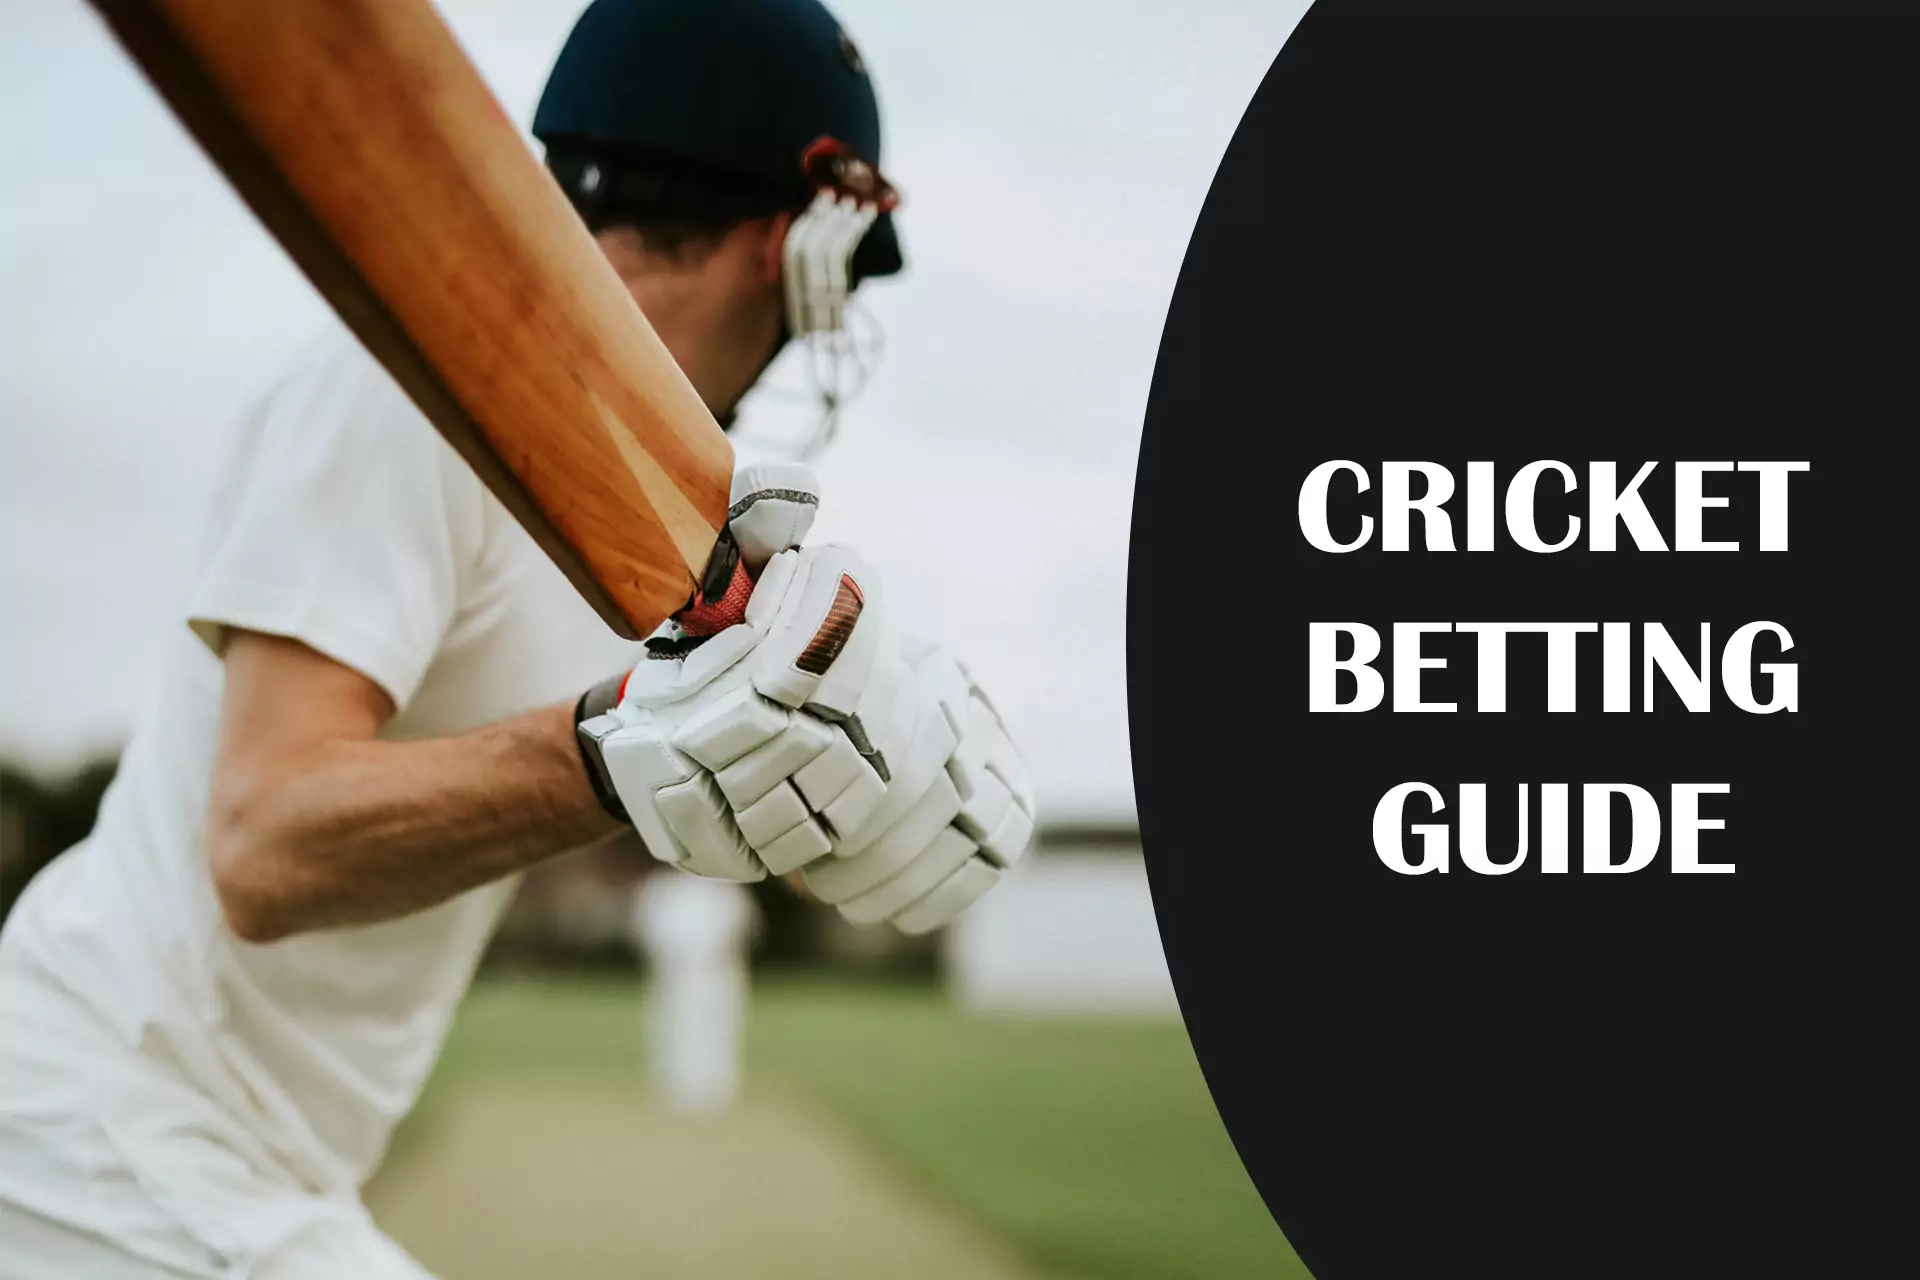 We have prepared for you articles on cricket betting.